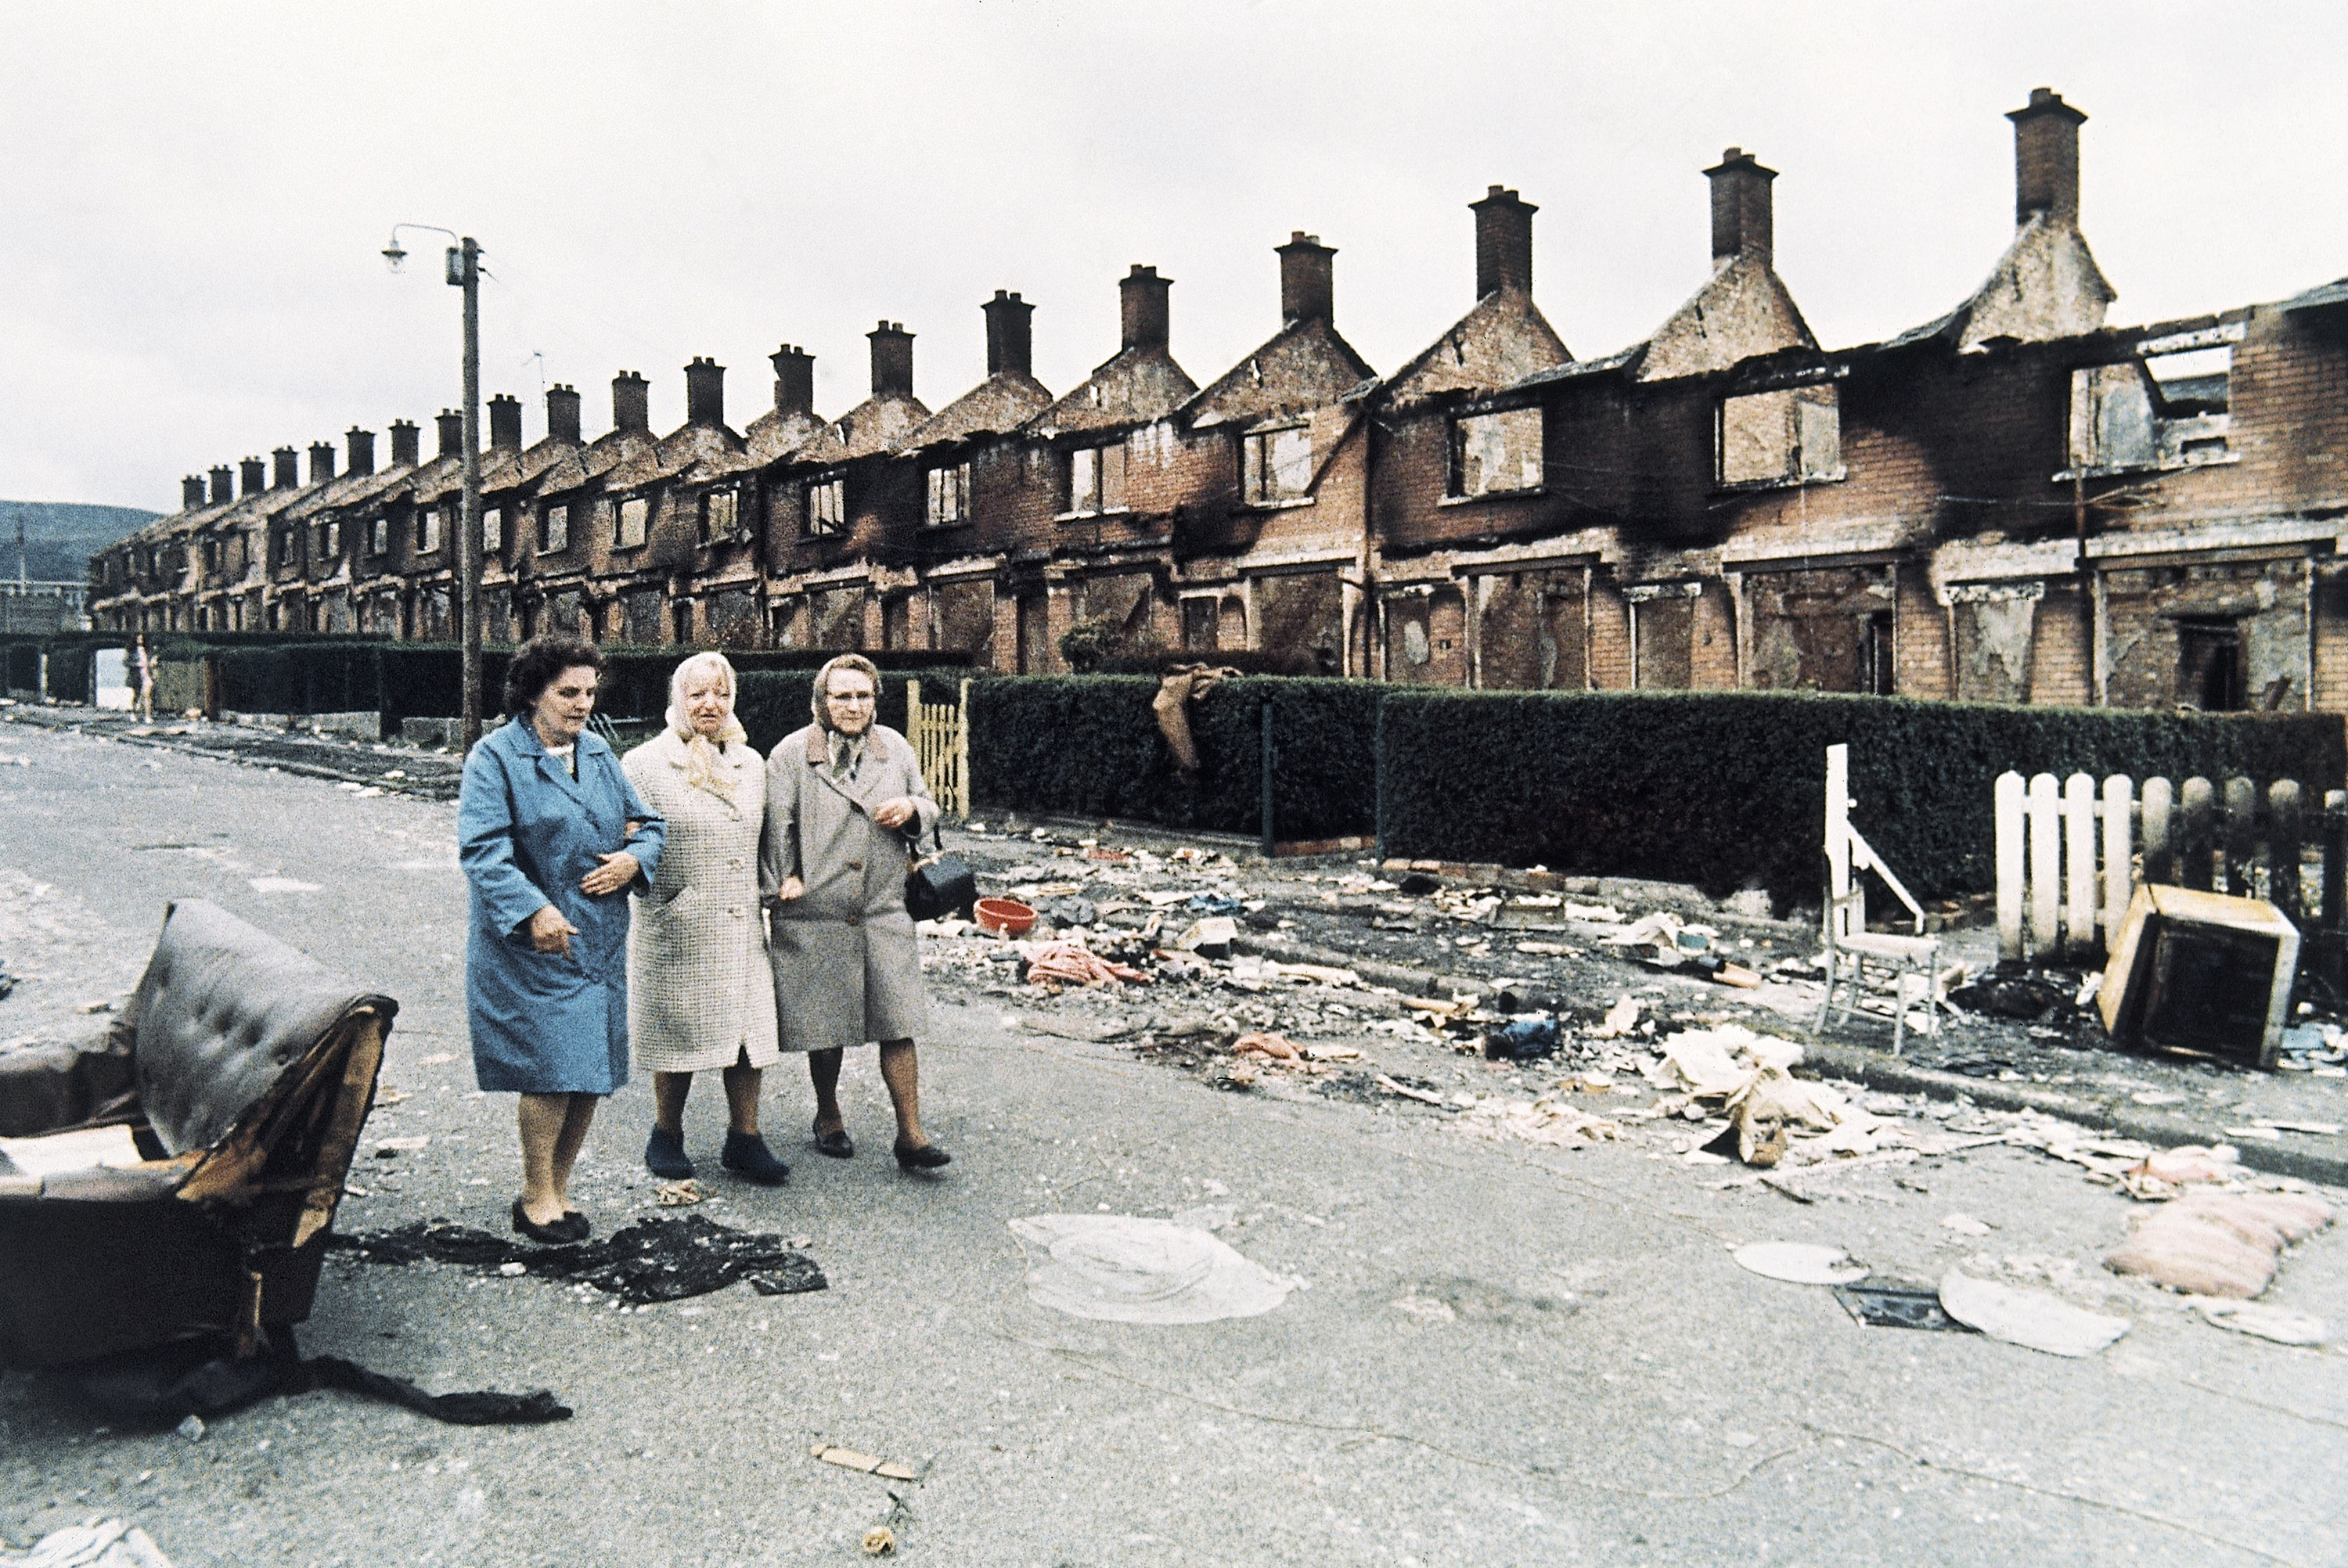 Local women walk through the rubble in Belfast, Northern Ireland on Aug. 17, 1971. In the background are rows of burnt out houses set alight during a "scorched earth" action by residents who had fled to other parts of Belfast in the wake of continuing violence